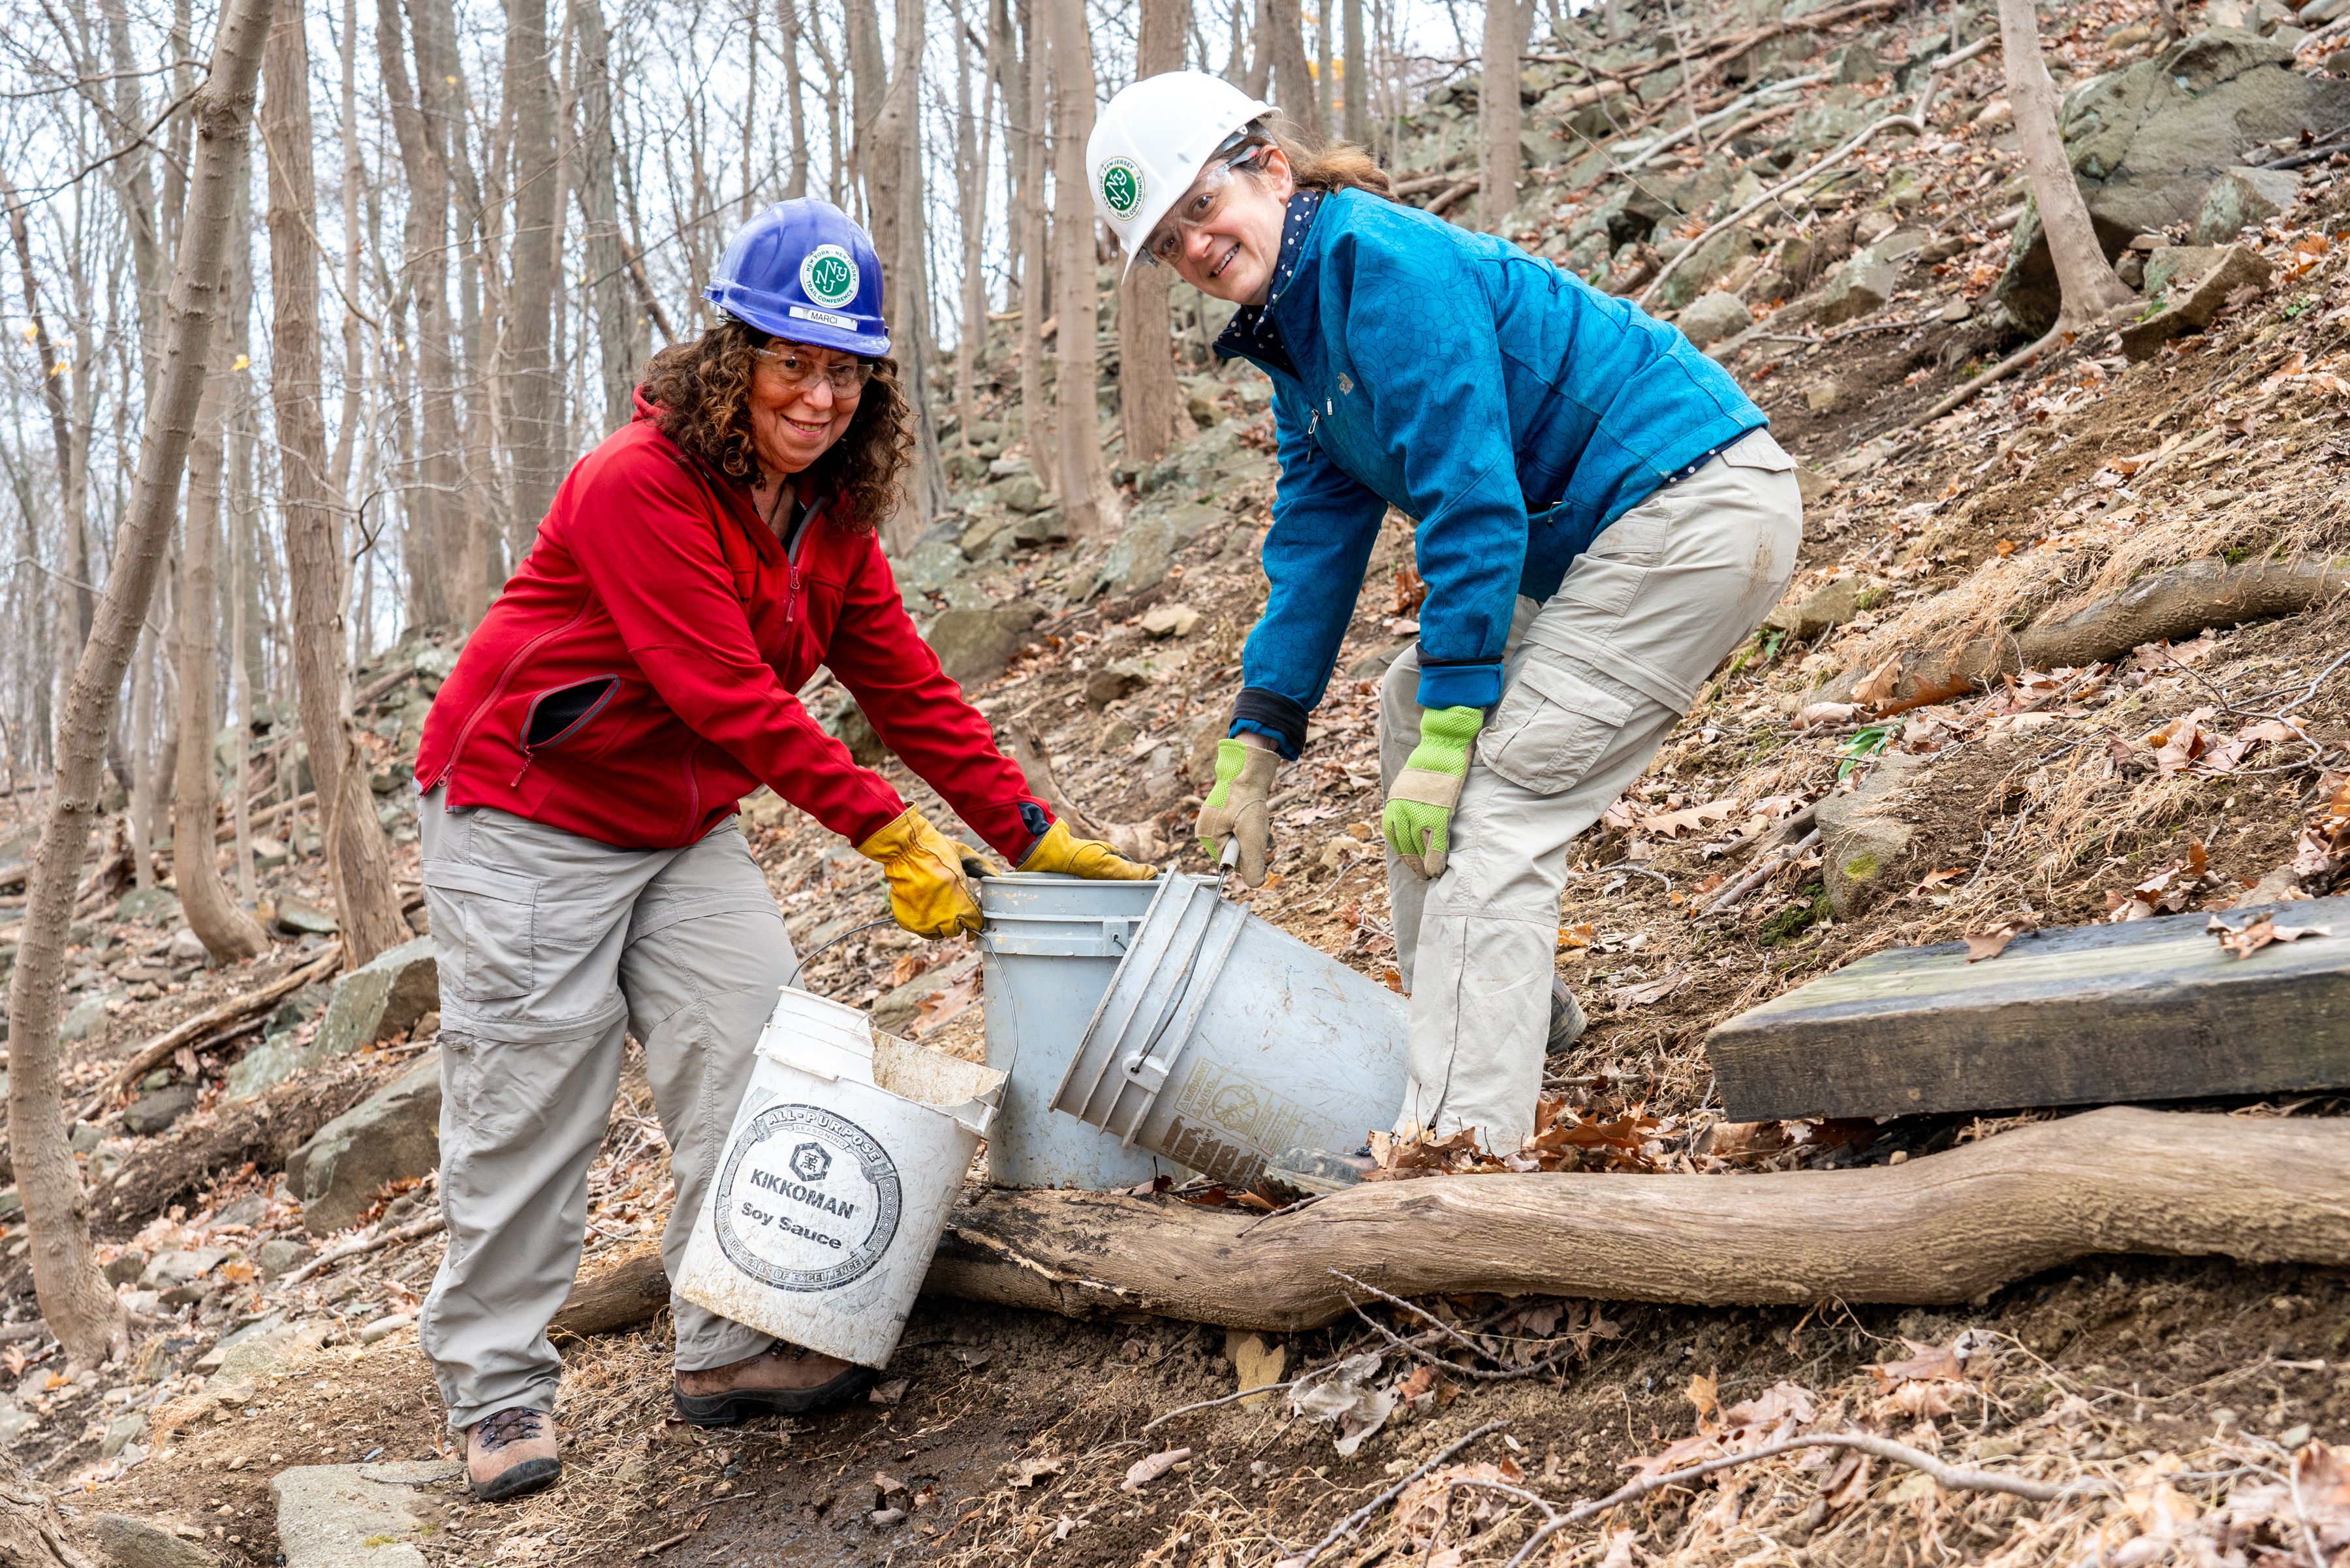 Two Long Distance Trails Crew members holding buckets